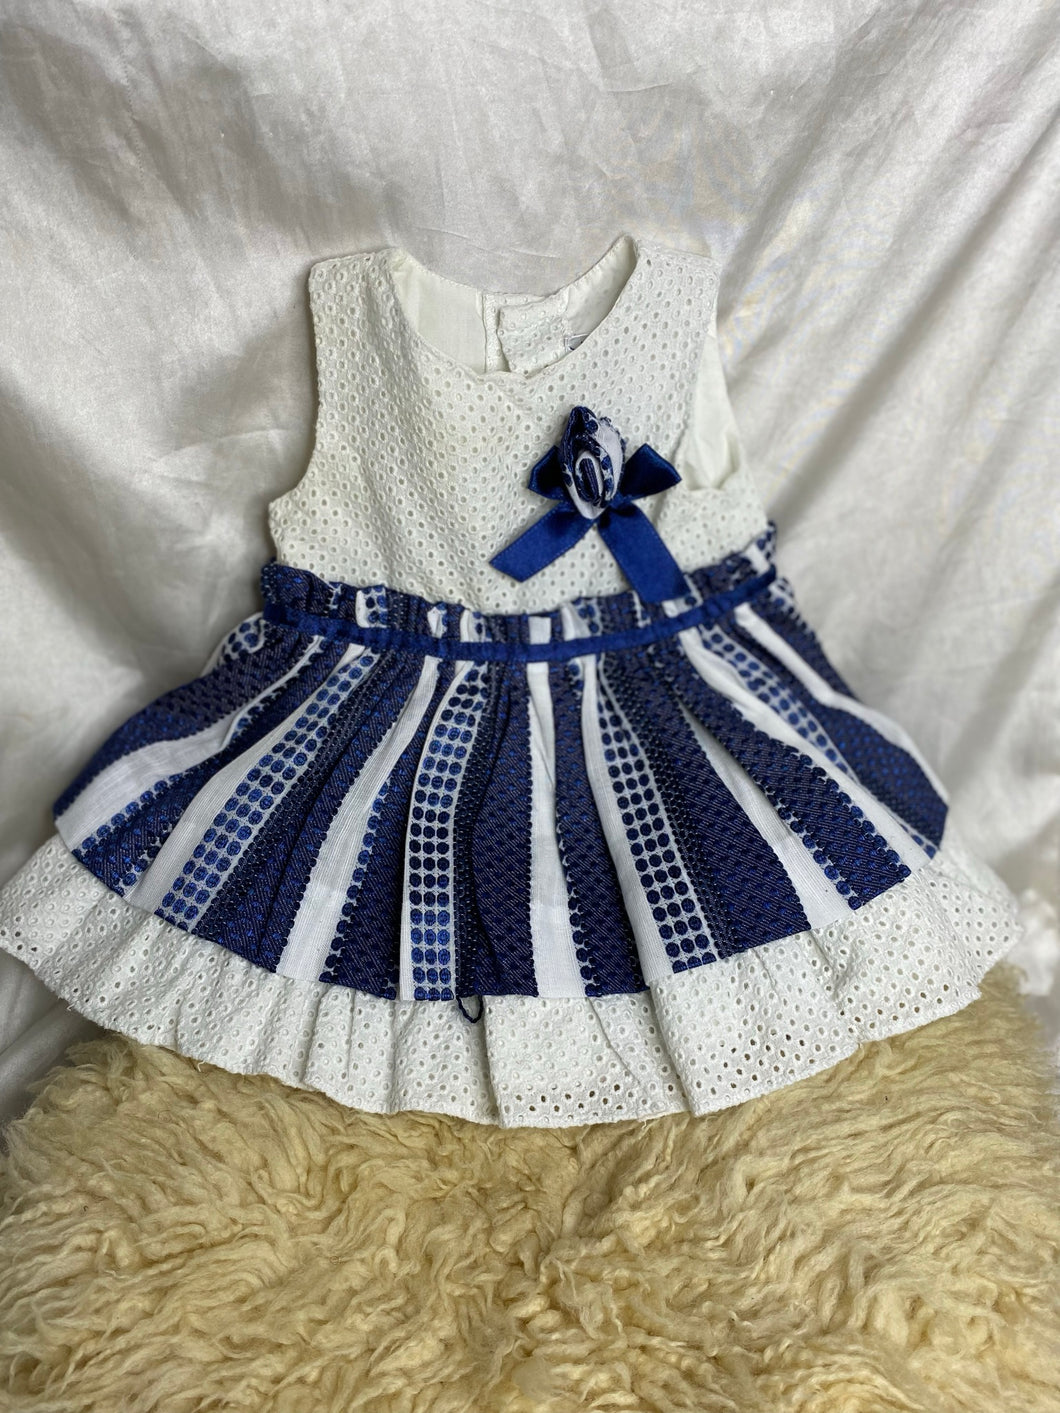 Childrens' Salon Dolce Petit Navy Strip and Cream Exquisite Formal Bonnet and Dress - Girls 12 Months